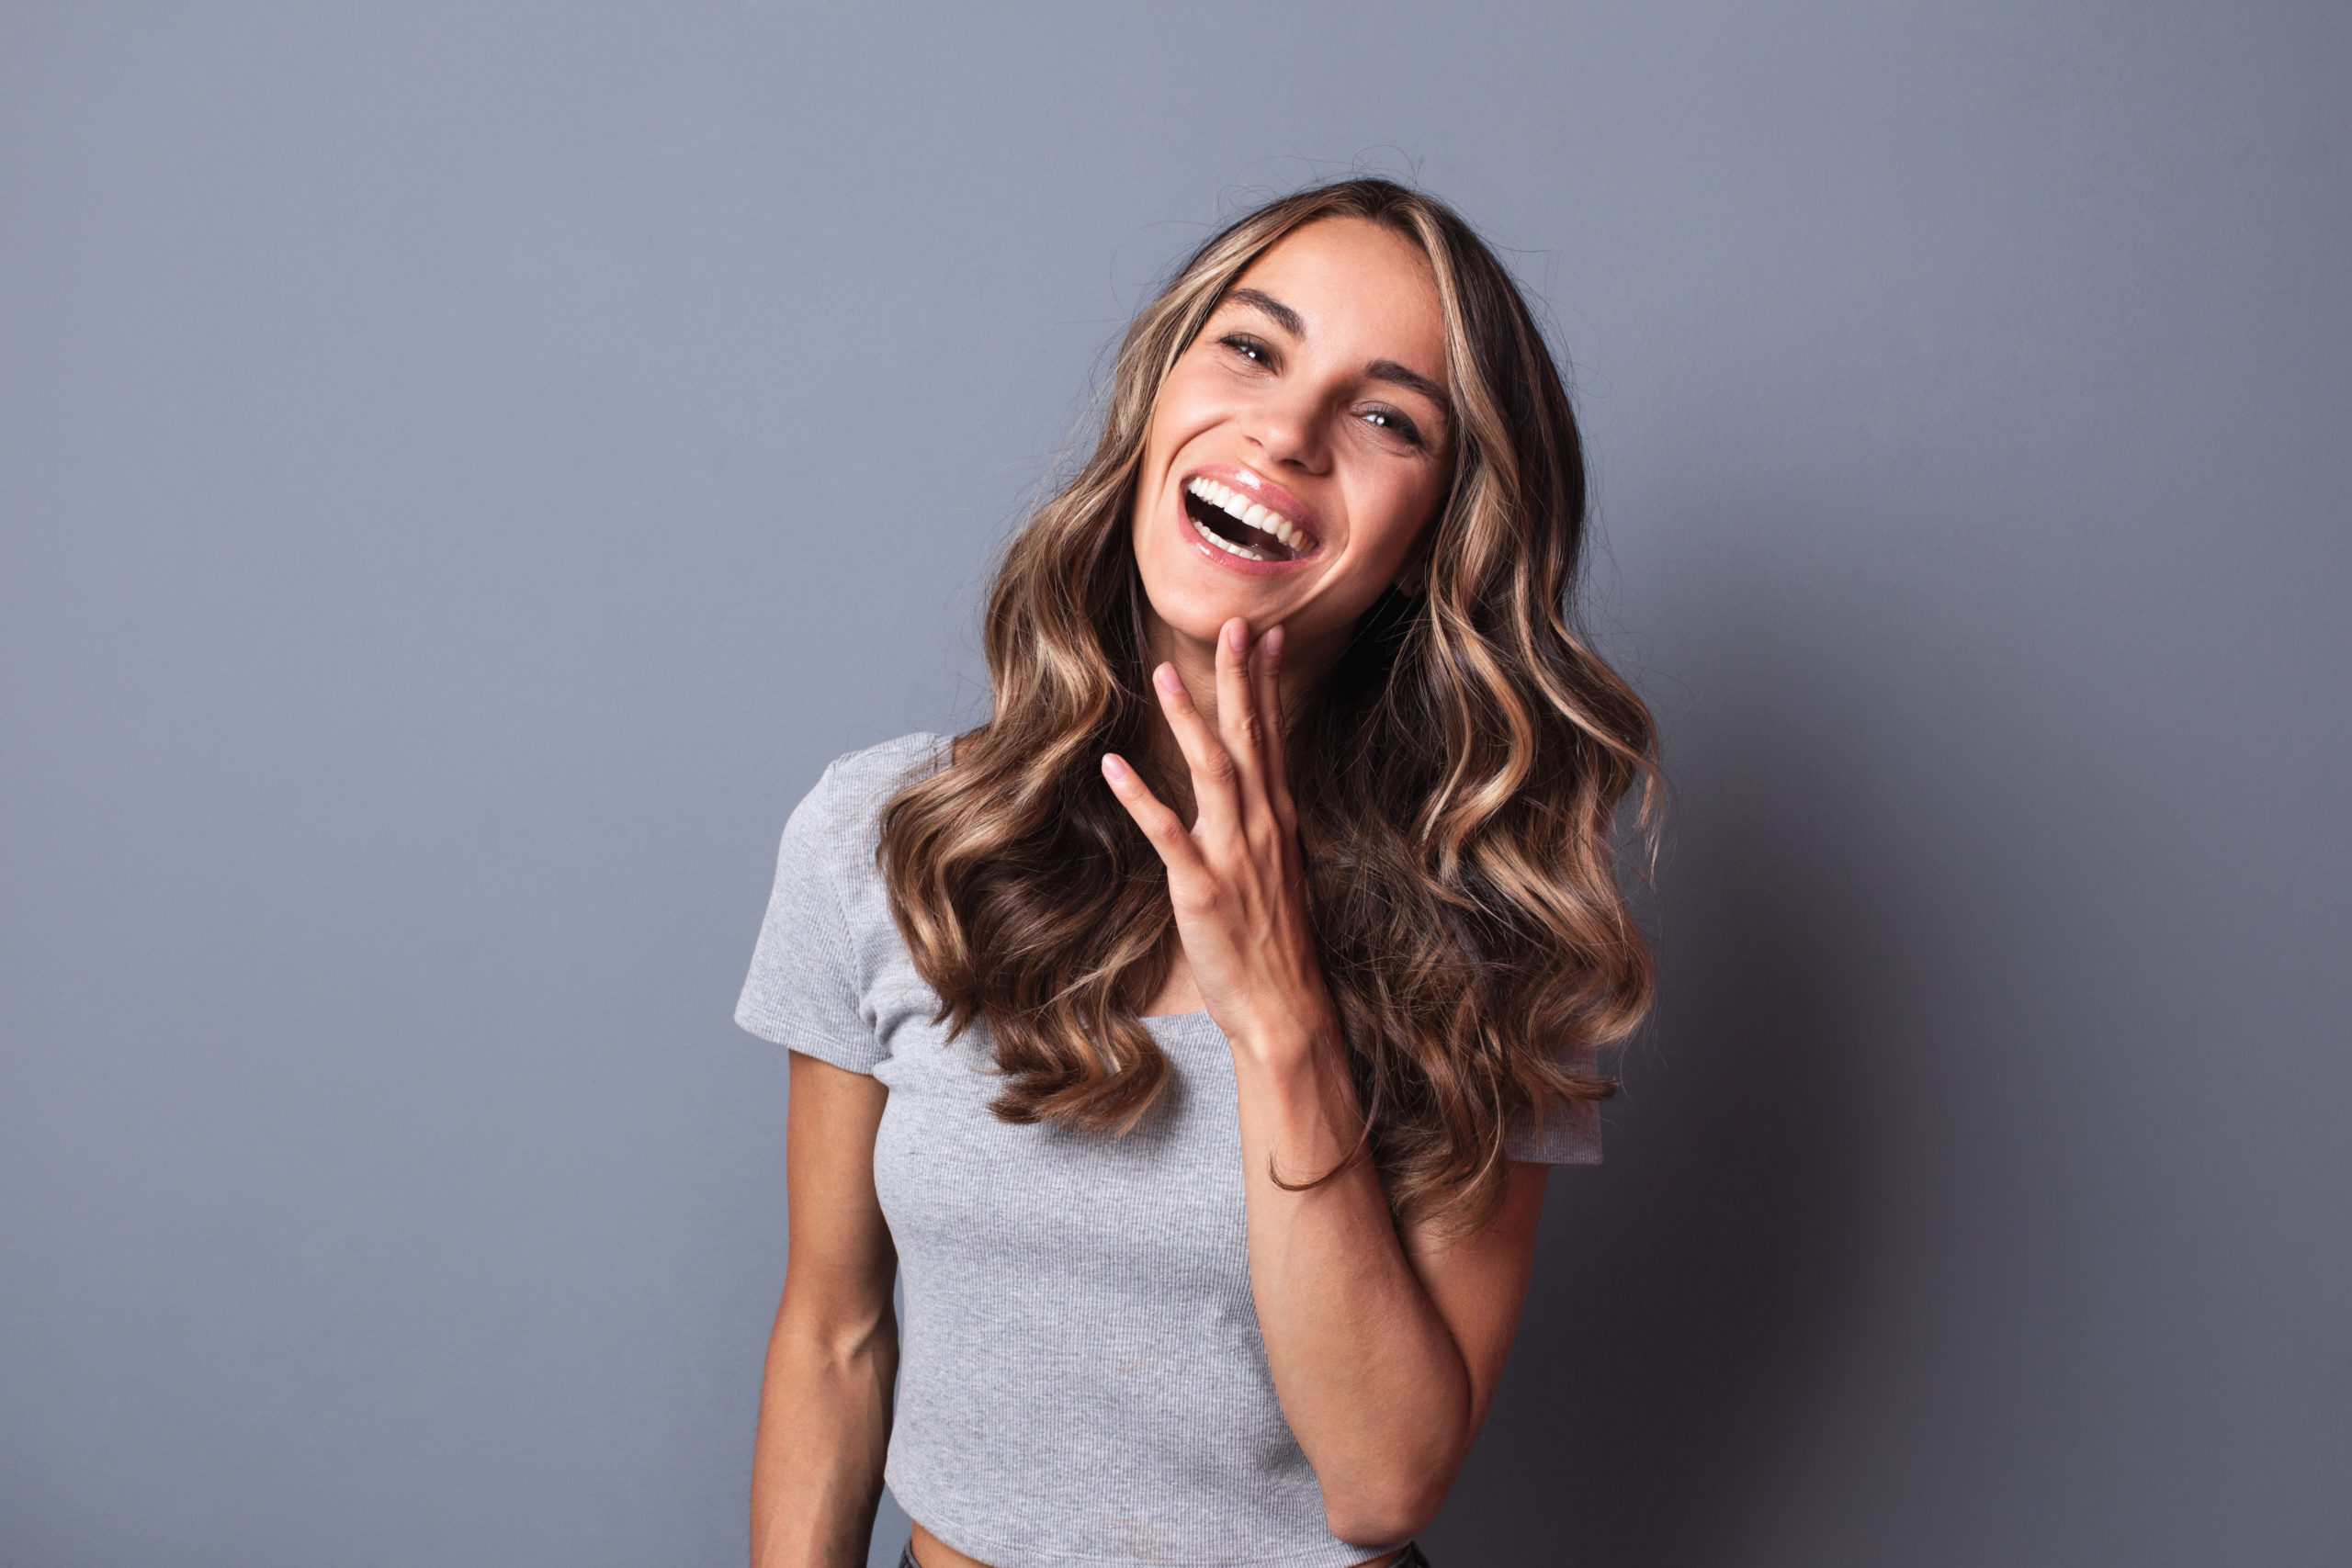 Smiling woman on grey wall background.